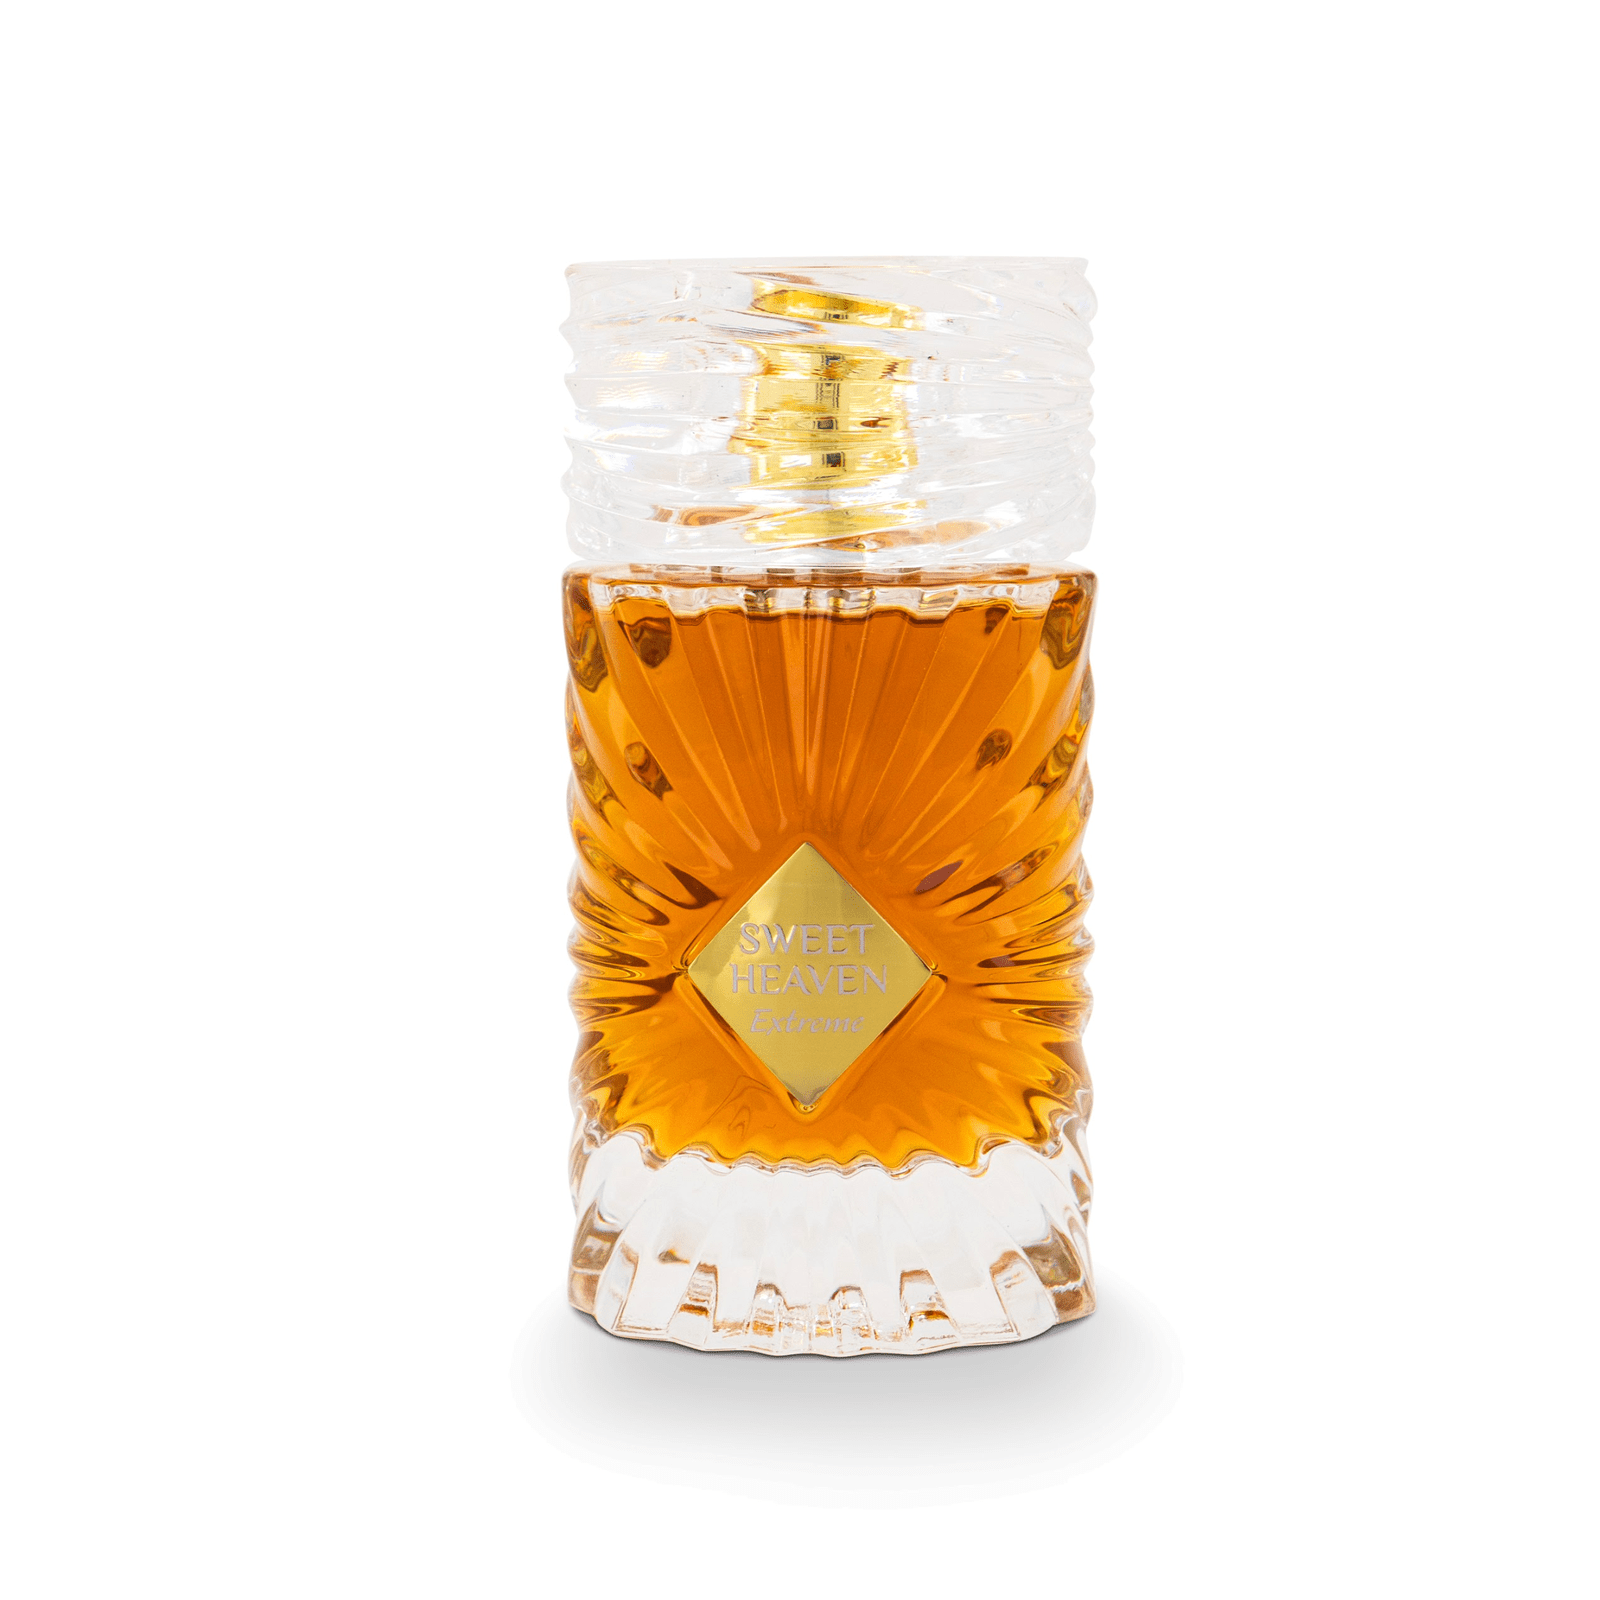 Sweet Heaven Extreme EDP - 100Ml 3.4Oz By Gulf Orchid